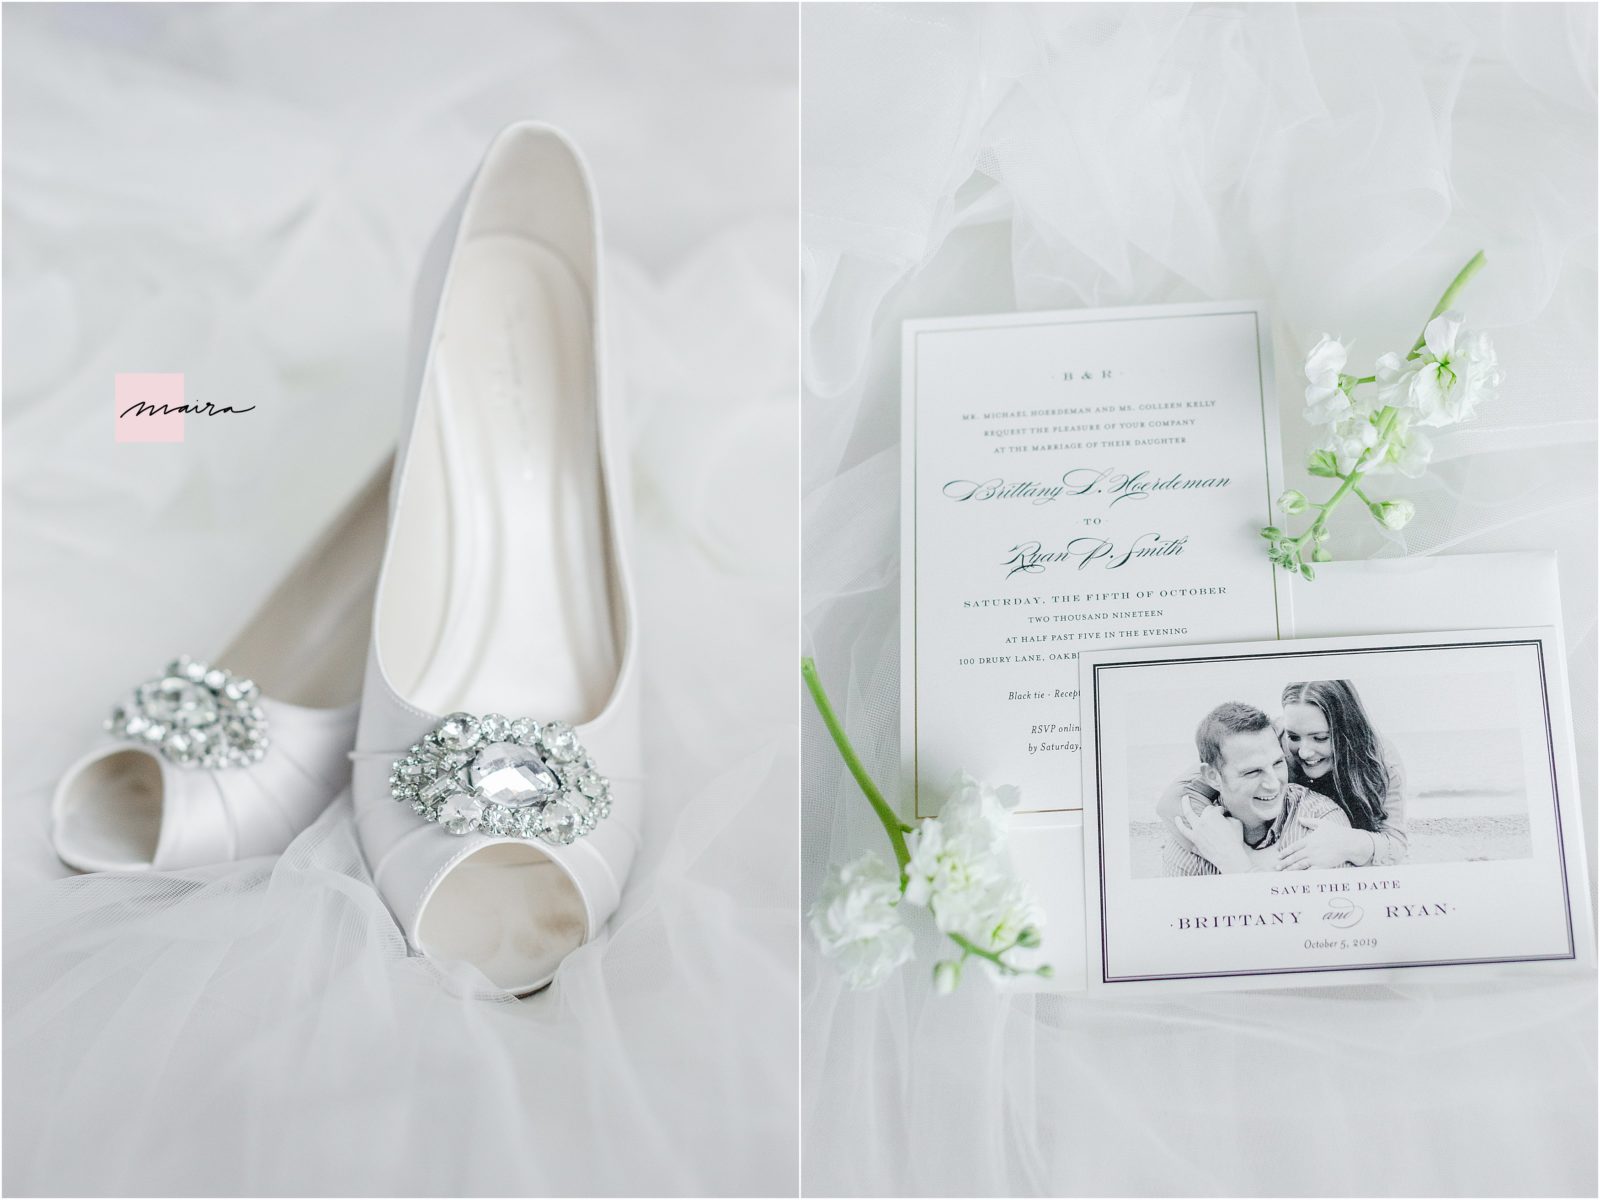 Oakbrook wedding in Drury Lane Wedding Details, Brides shoes and invitations